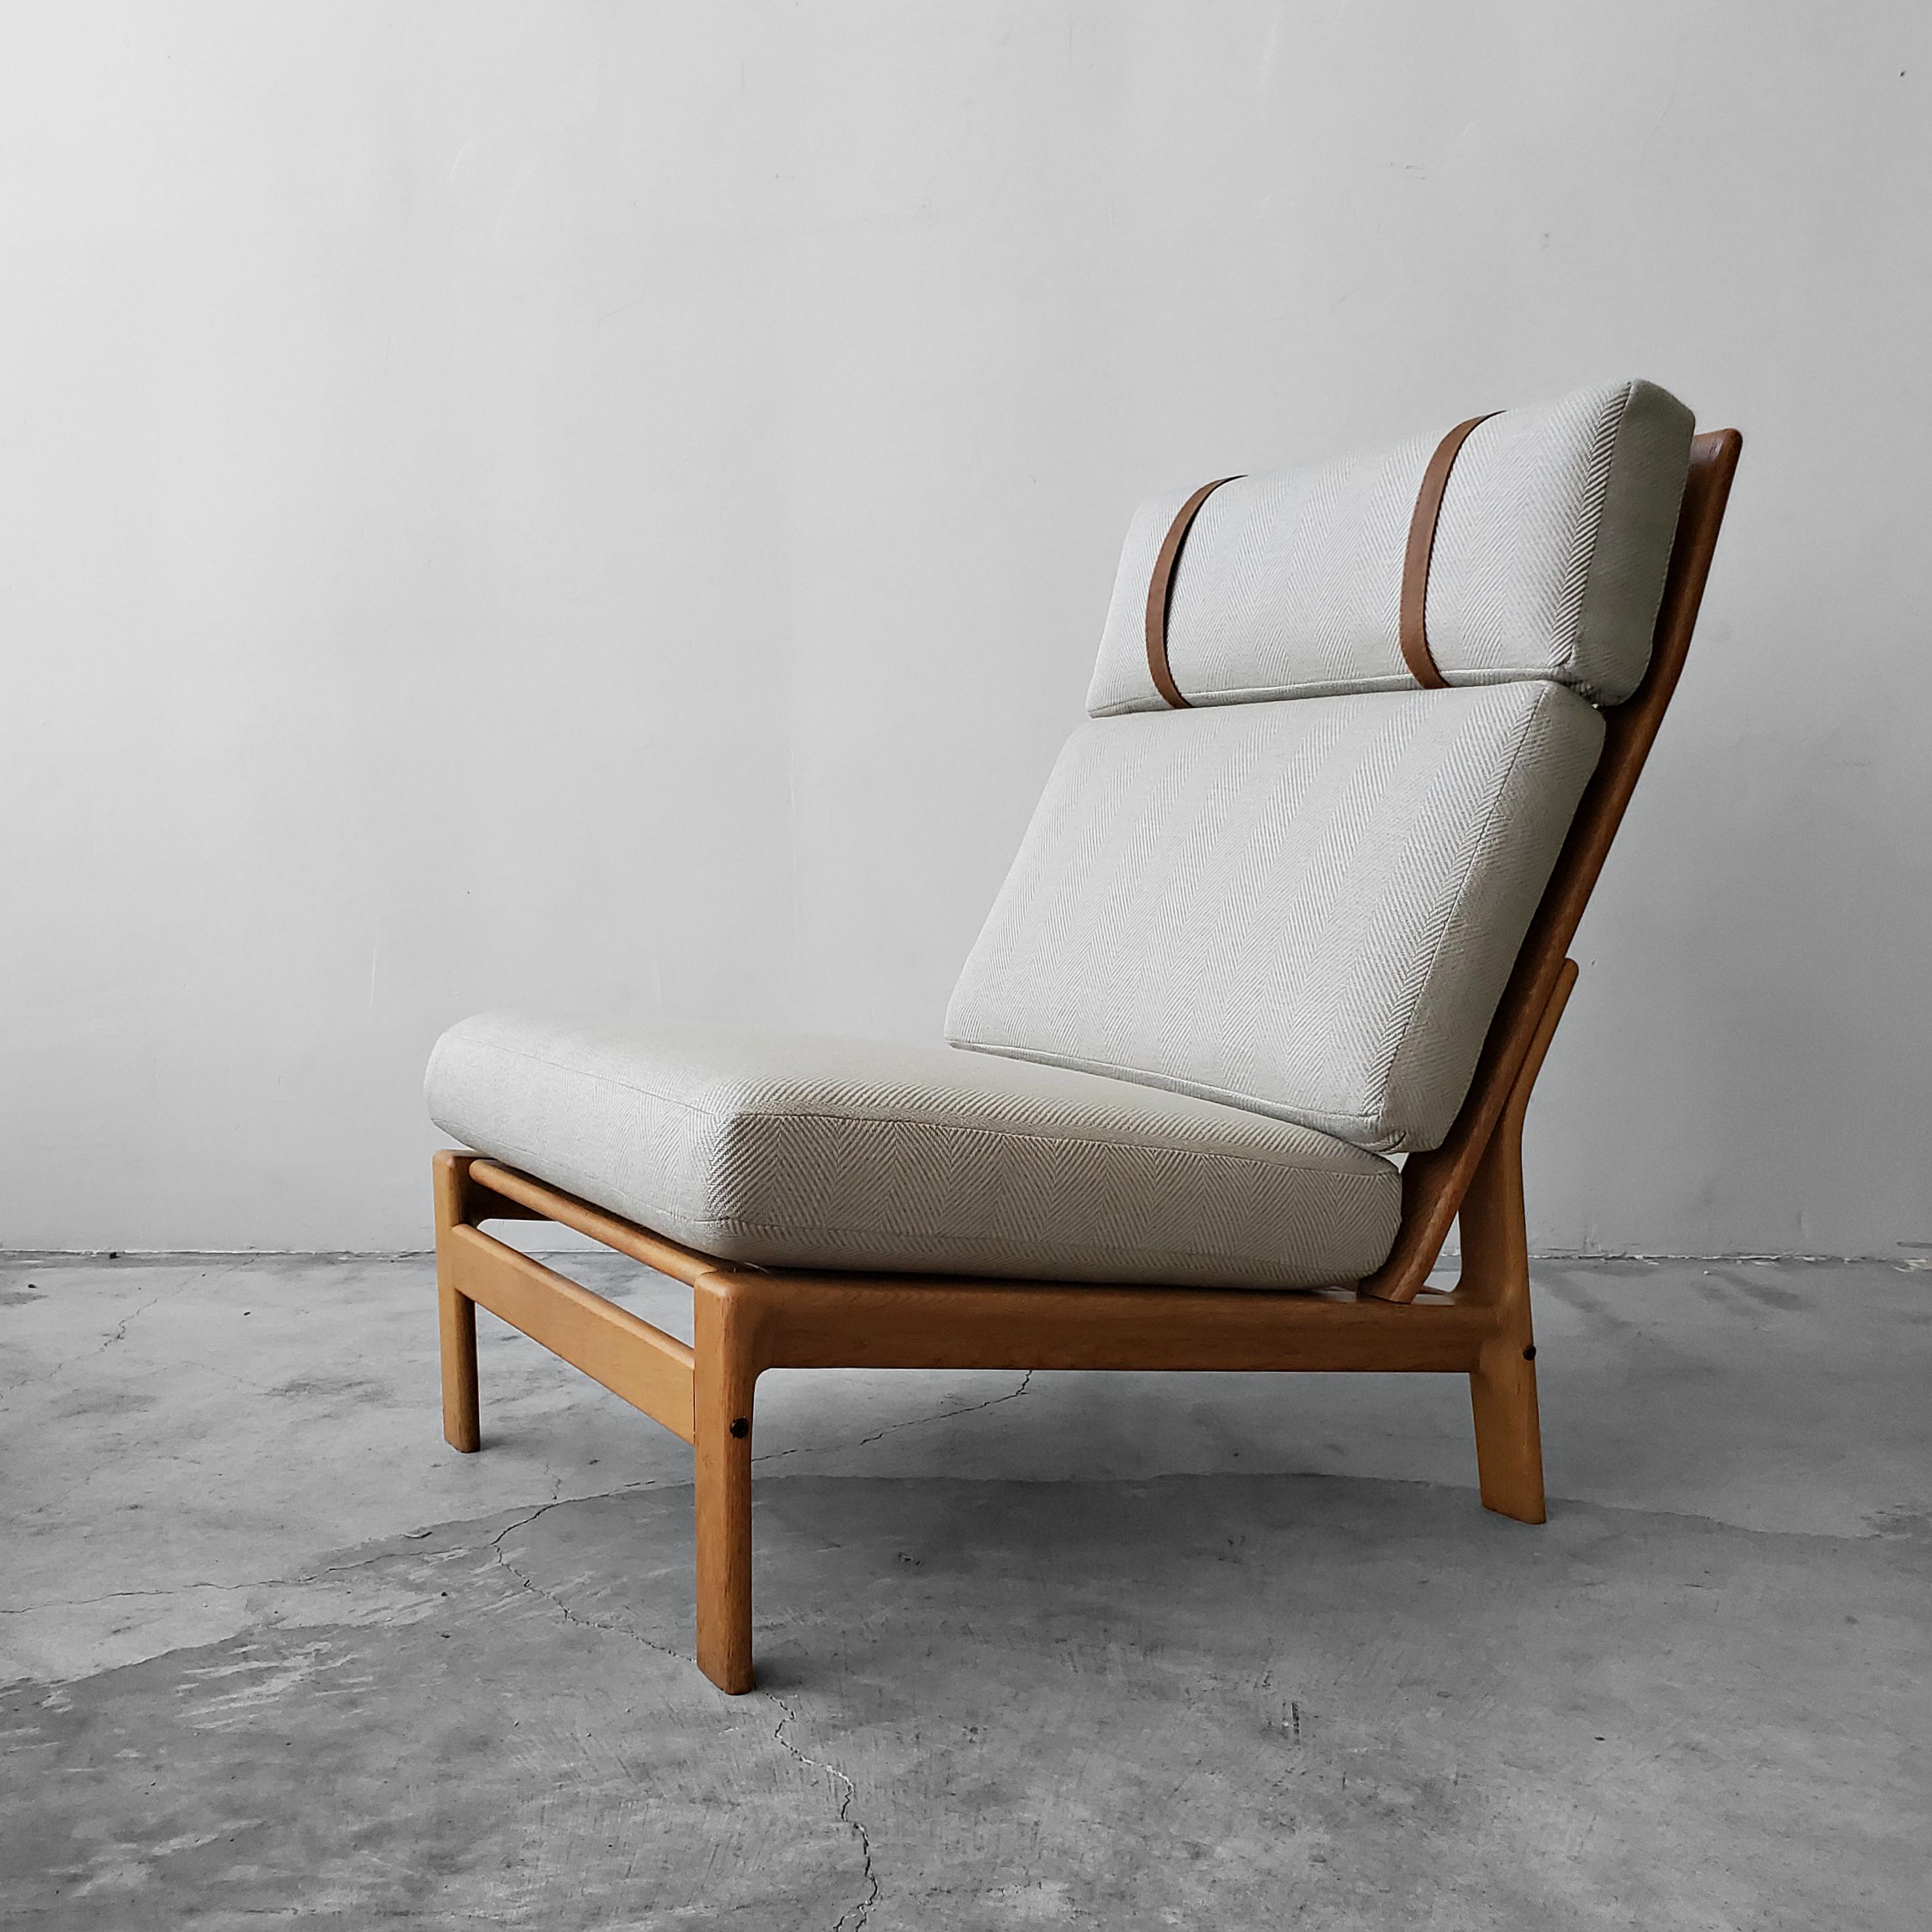 Rare solid oak framed Danish high back lounge chair by Komfort design. This chair had a gently reclined position that give it beautiful lines as well as make it very comfortable.

Chair has been newly upholstered in a high quality herringbone